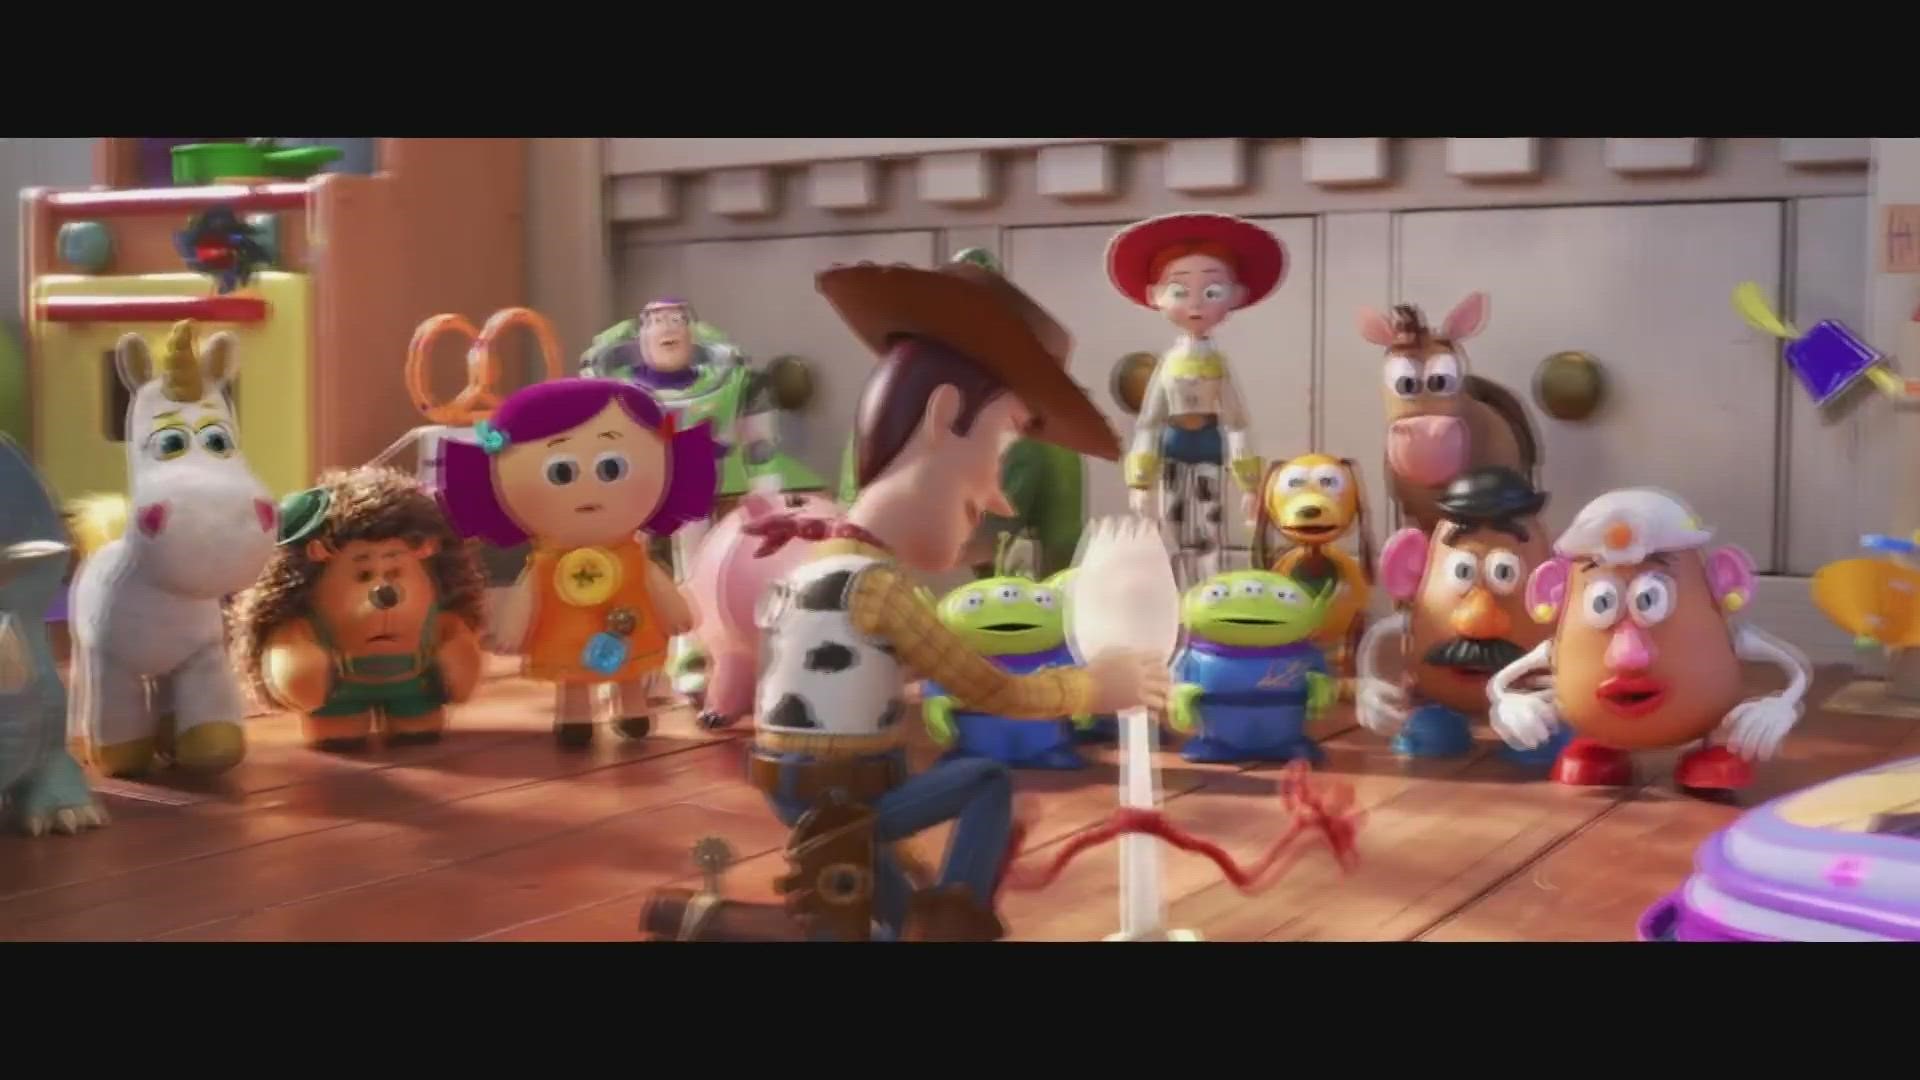 Disney just announced some big sequels in the works, which includes Toy Story 5.